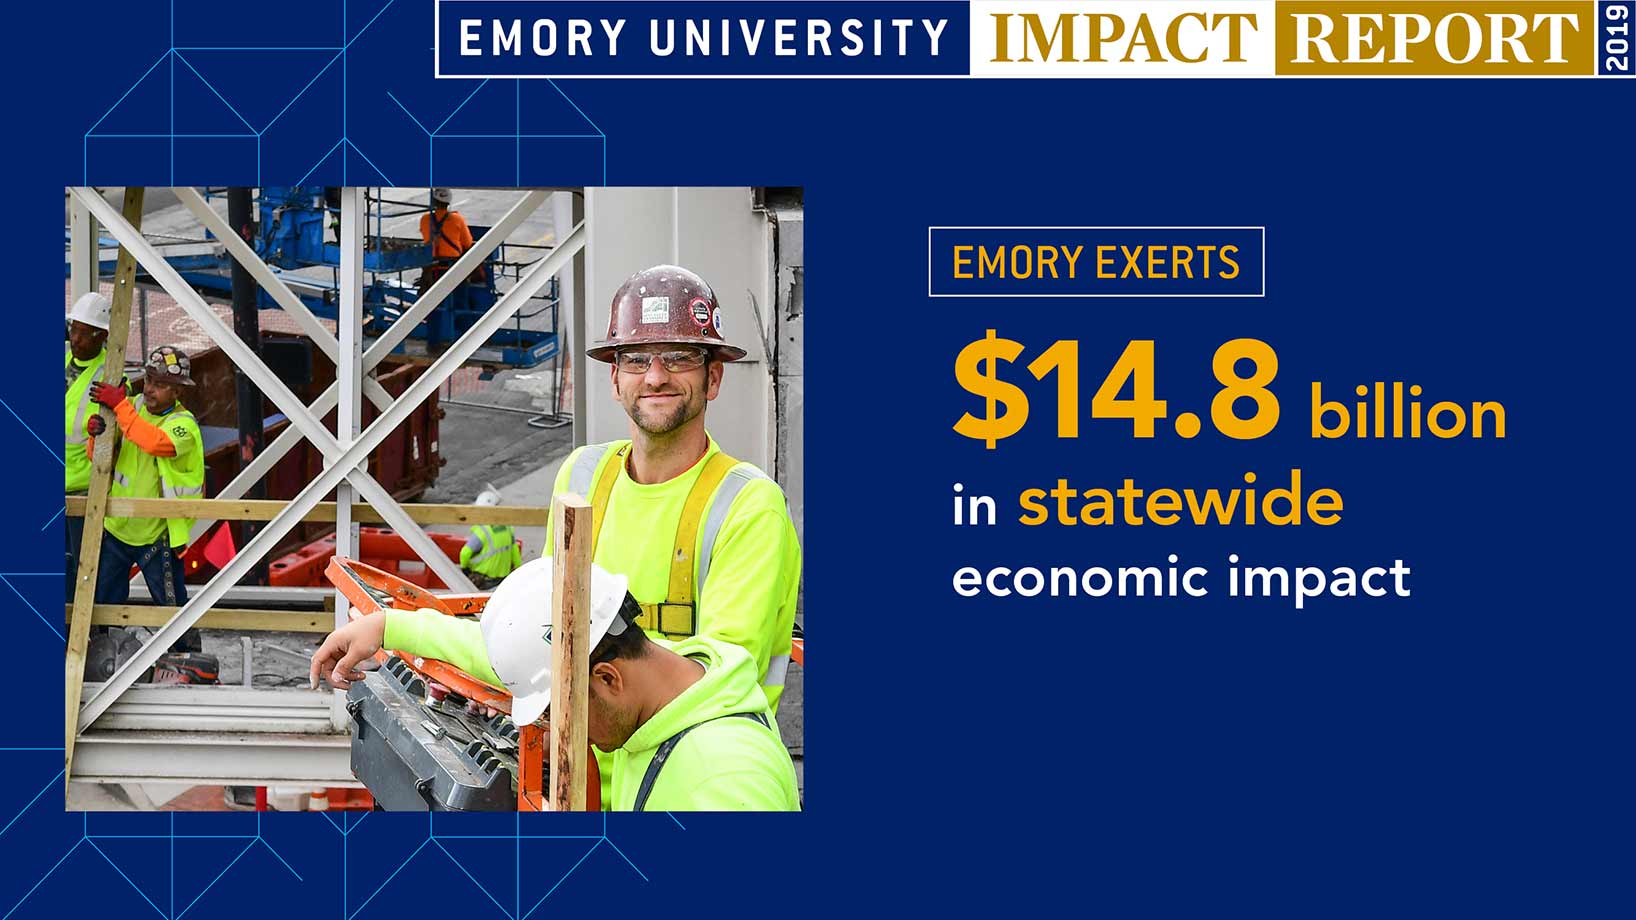 Emory exerts $14.8 billion in statewide economic impact 